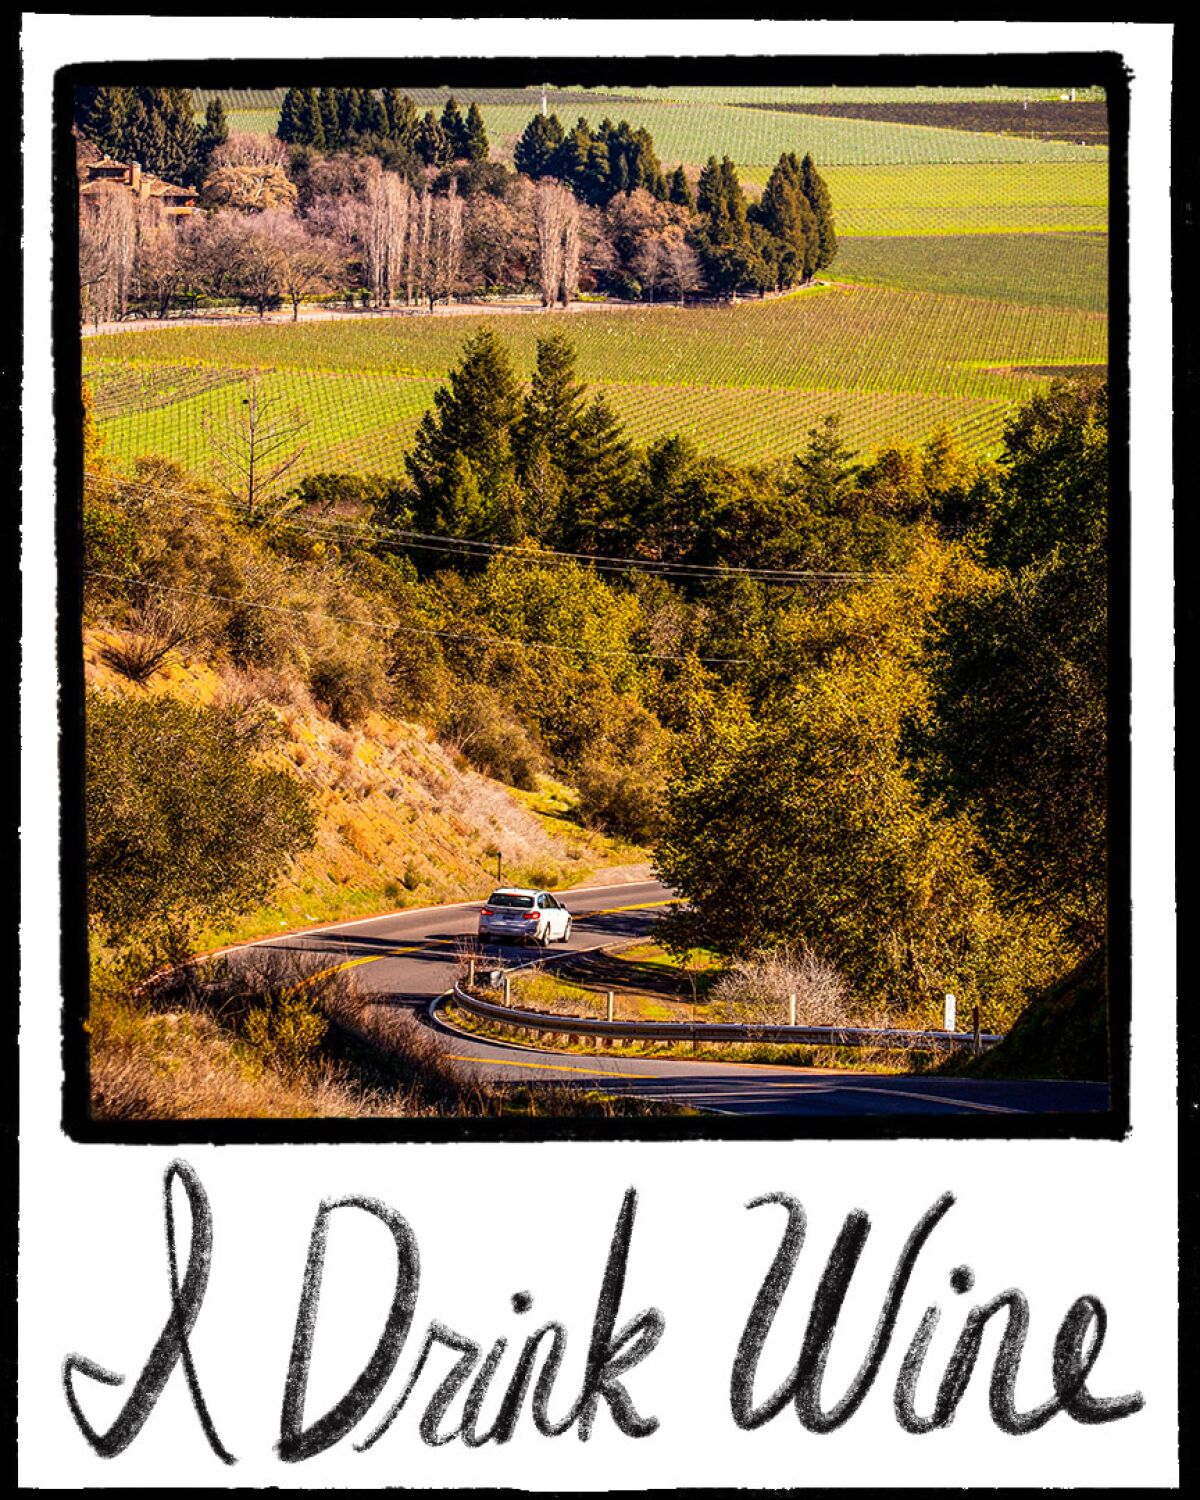 Car drives down a road in Napa Valley, with the words "I drink wine" under the photo.